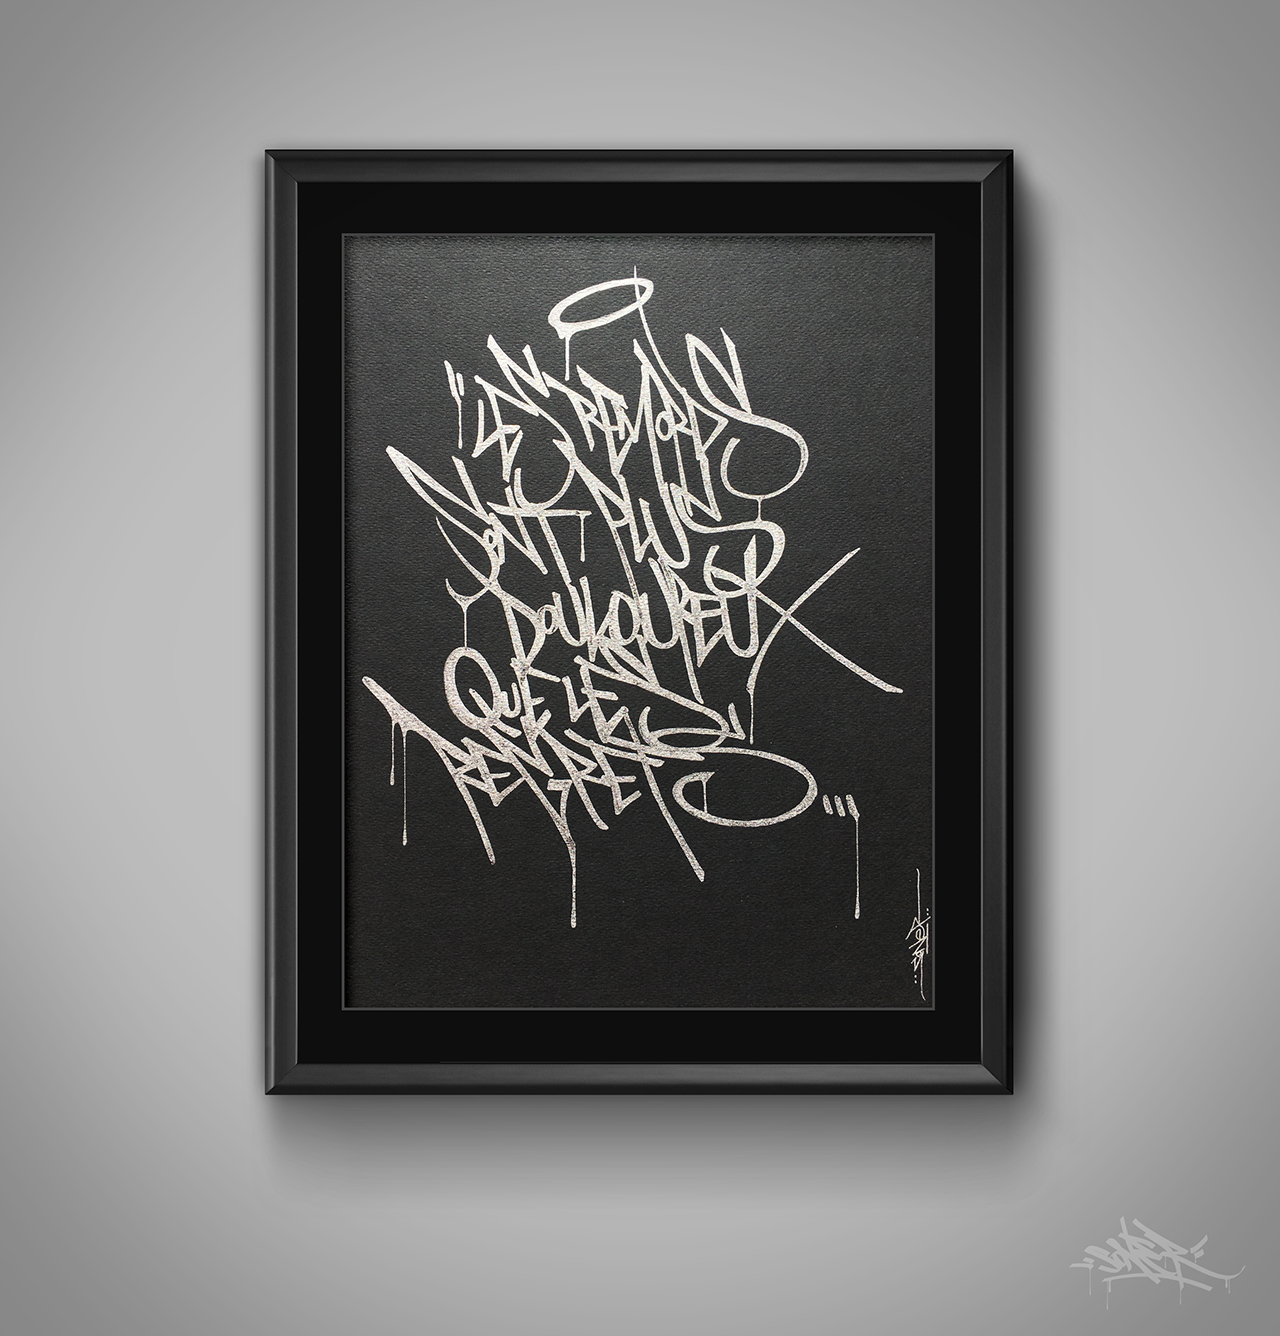 Caligrafitizm projects